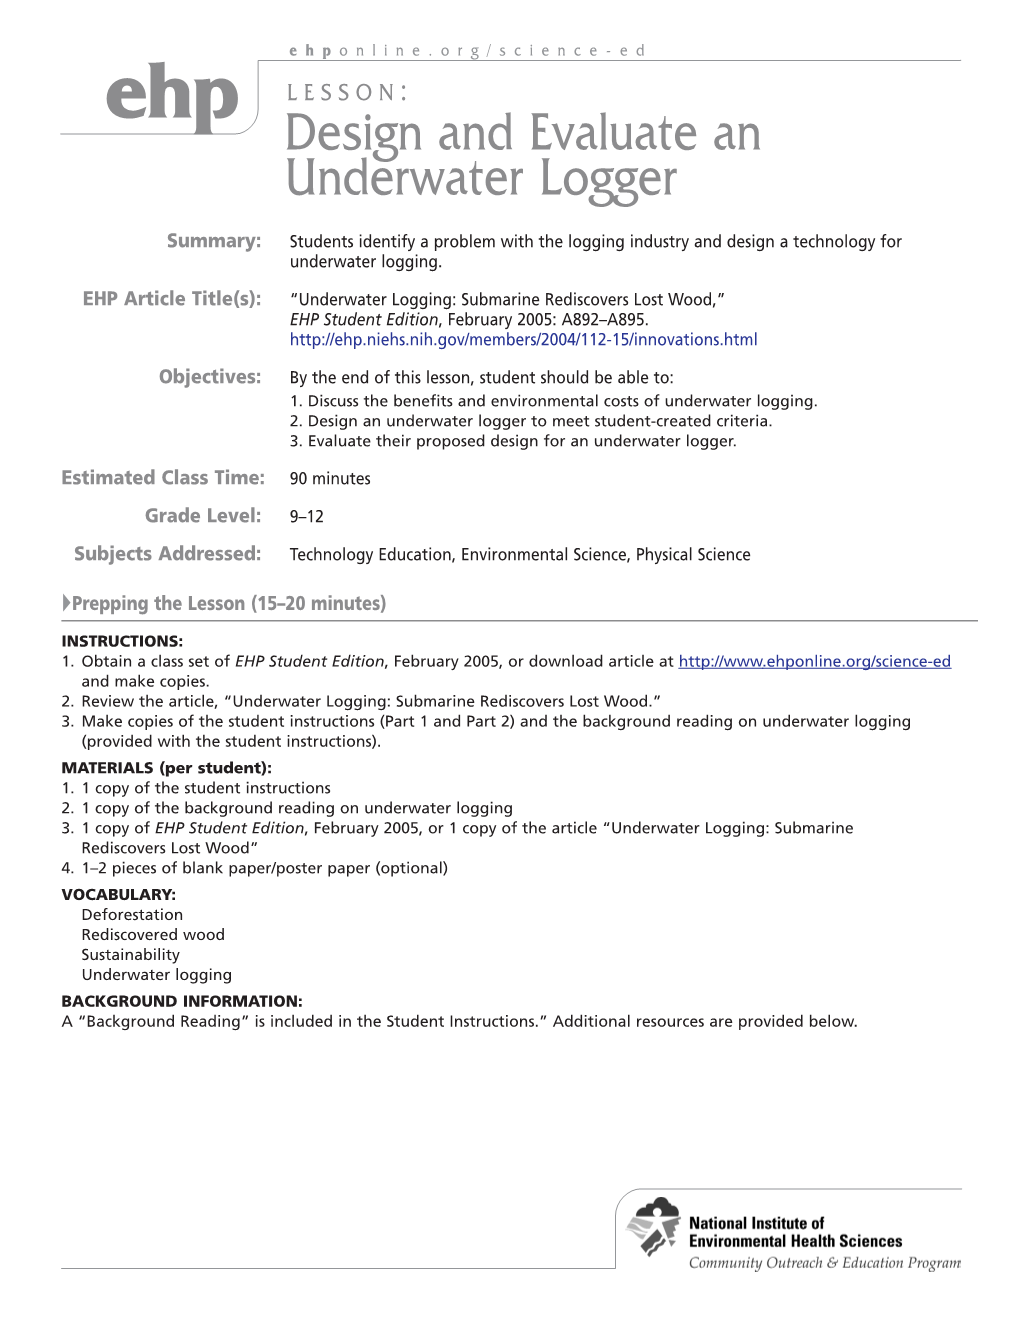 Design and Evaluate an Underwater Logger